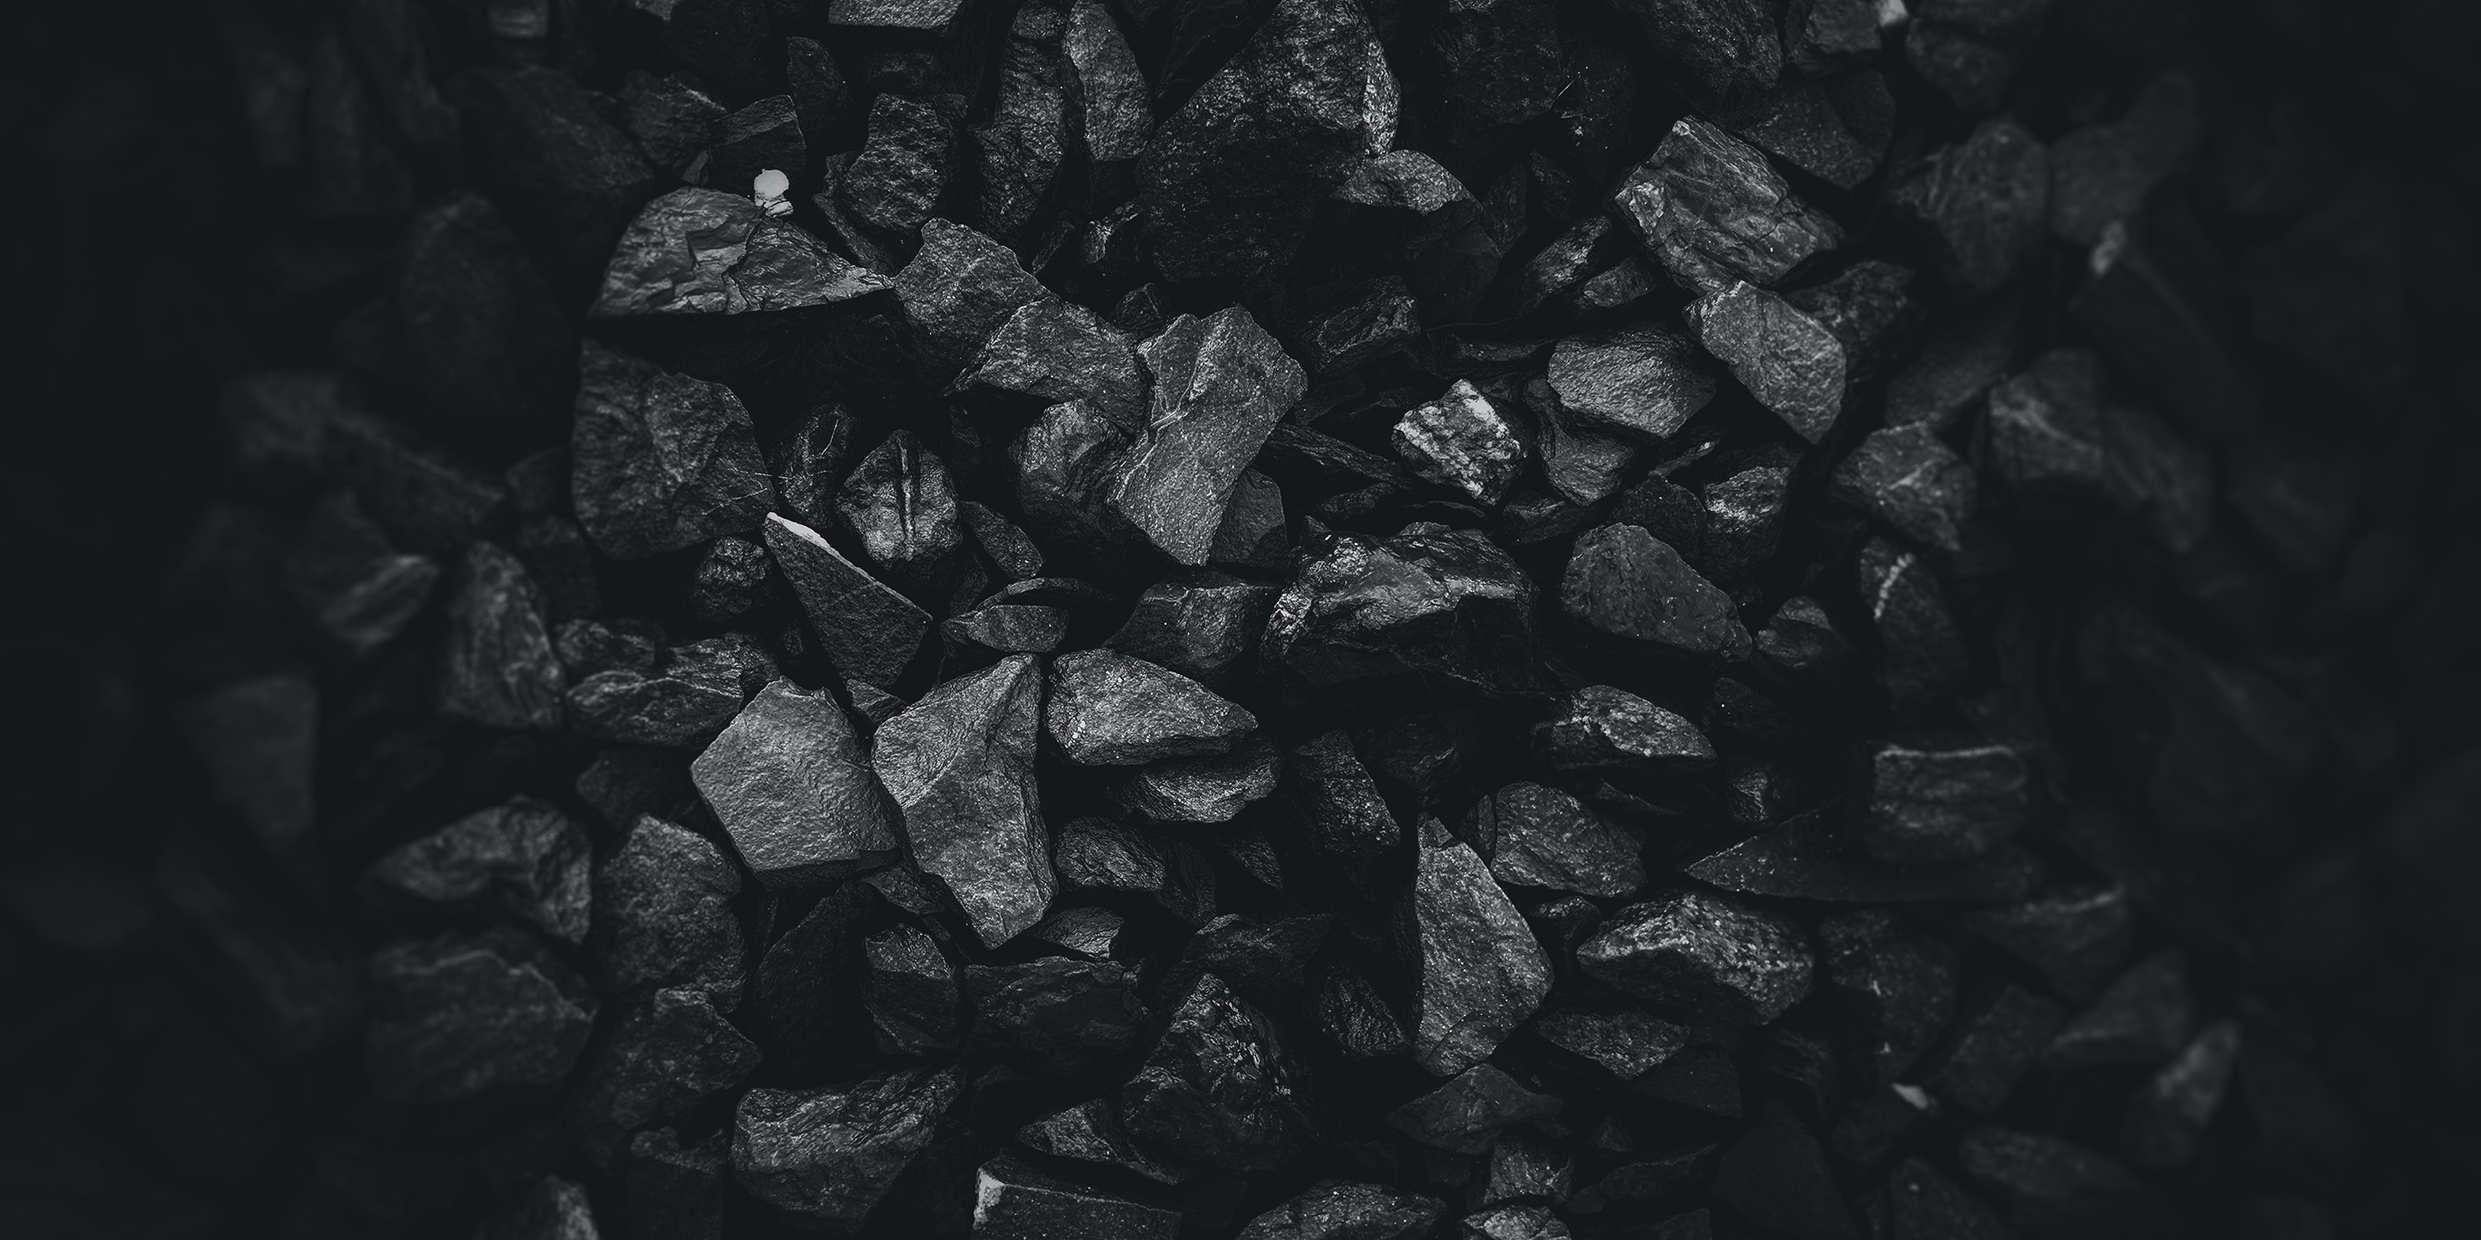 Image of large pile of coal